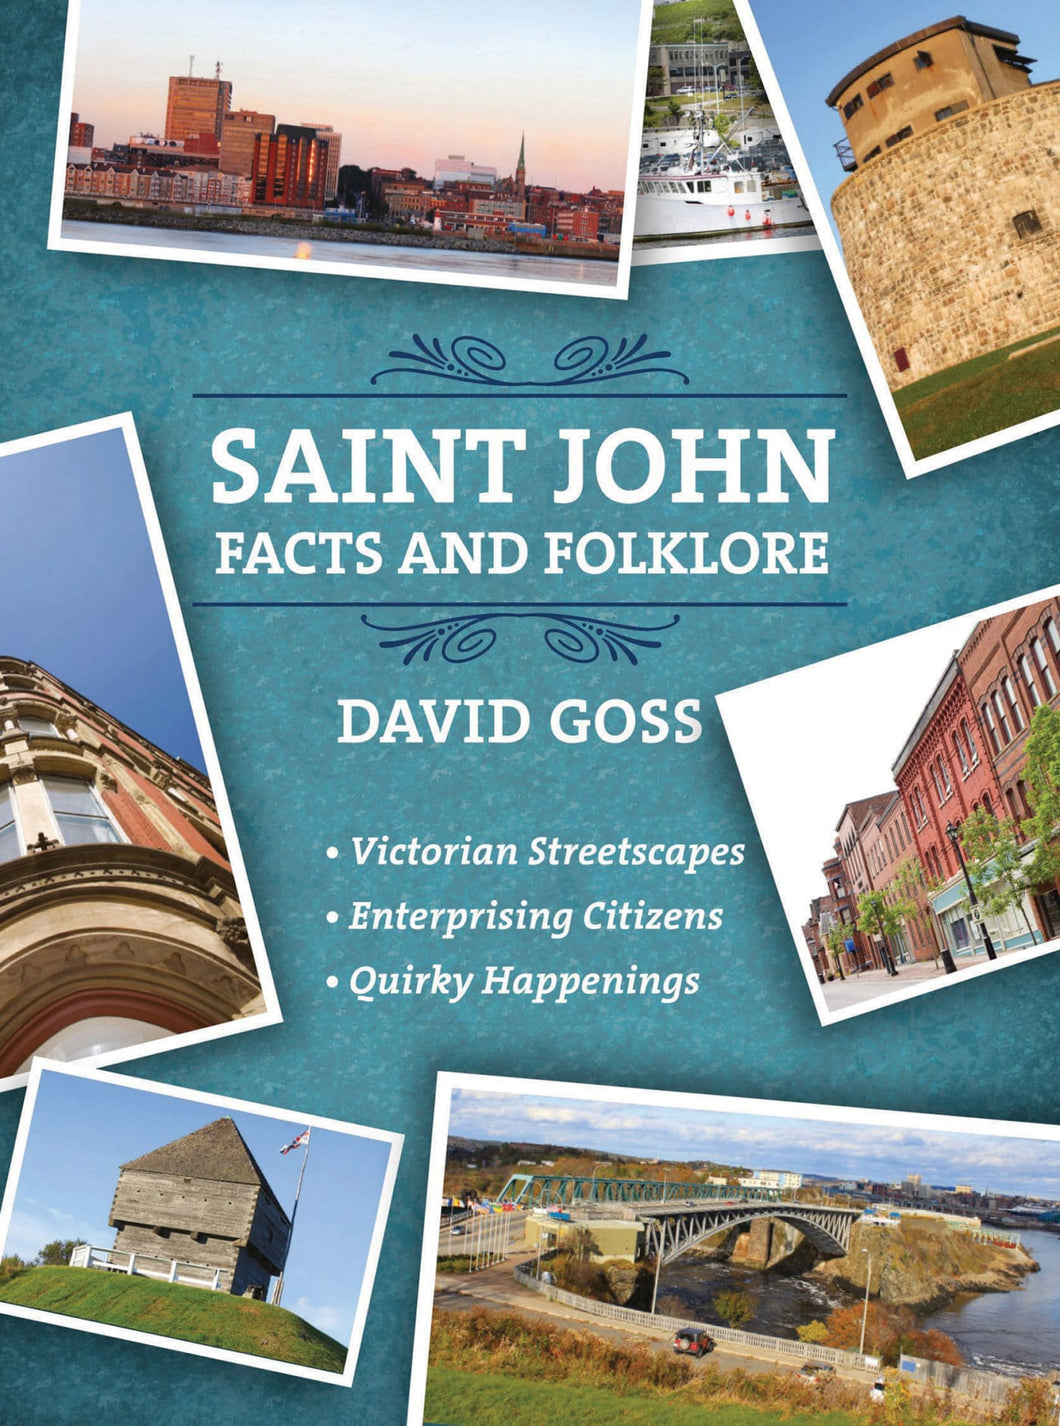 Saint John Facts and Folklore